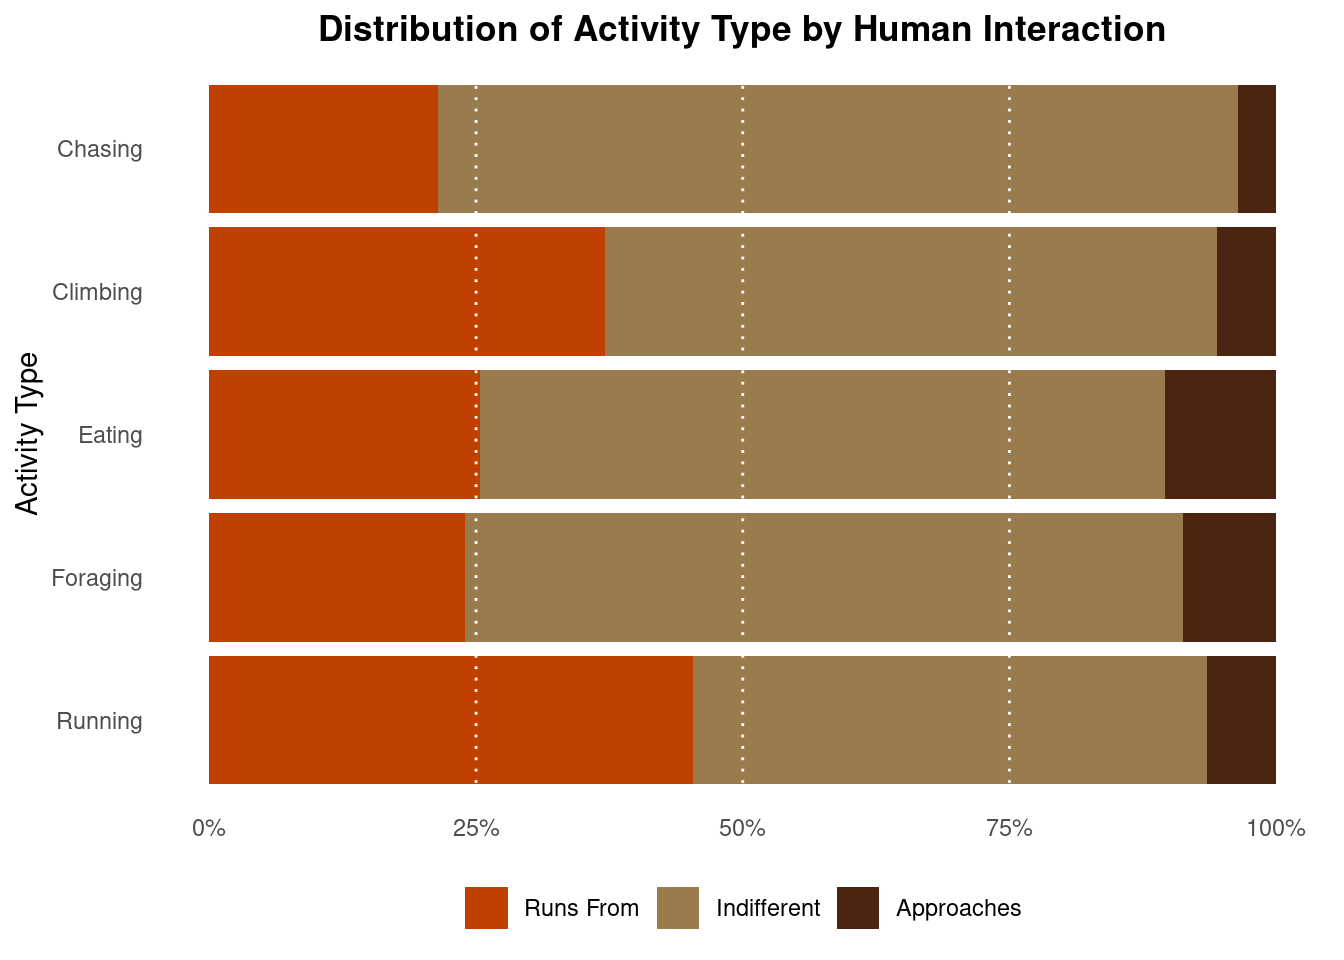 The bar chart, Distribution of Activity Type by Human Interaction, displays how activity type effects how squirrels interact with humans. The y axis displays activity types (running, foraging, eating, climbing, and chasing) and the x axis displays the percentage from 0 to 100 percent. The fill contains the following interactions with humans: runs from, indifferent, and approaches. For running, the squirrels equally ran from or were indifferent to humans, and rarely approached. For foraging, climbing, and chasing, squirrels ran from humans 25 percent of the time and were indifferent a majority of the time. For climbing, squirrels were indifferent the most often, closely followed by runs from.